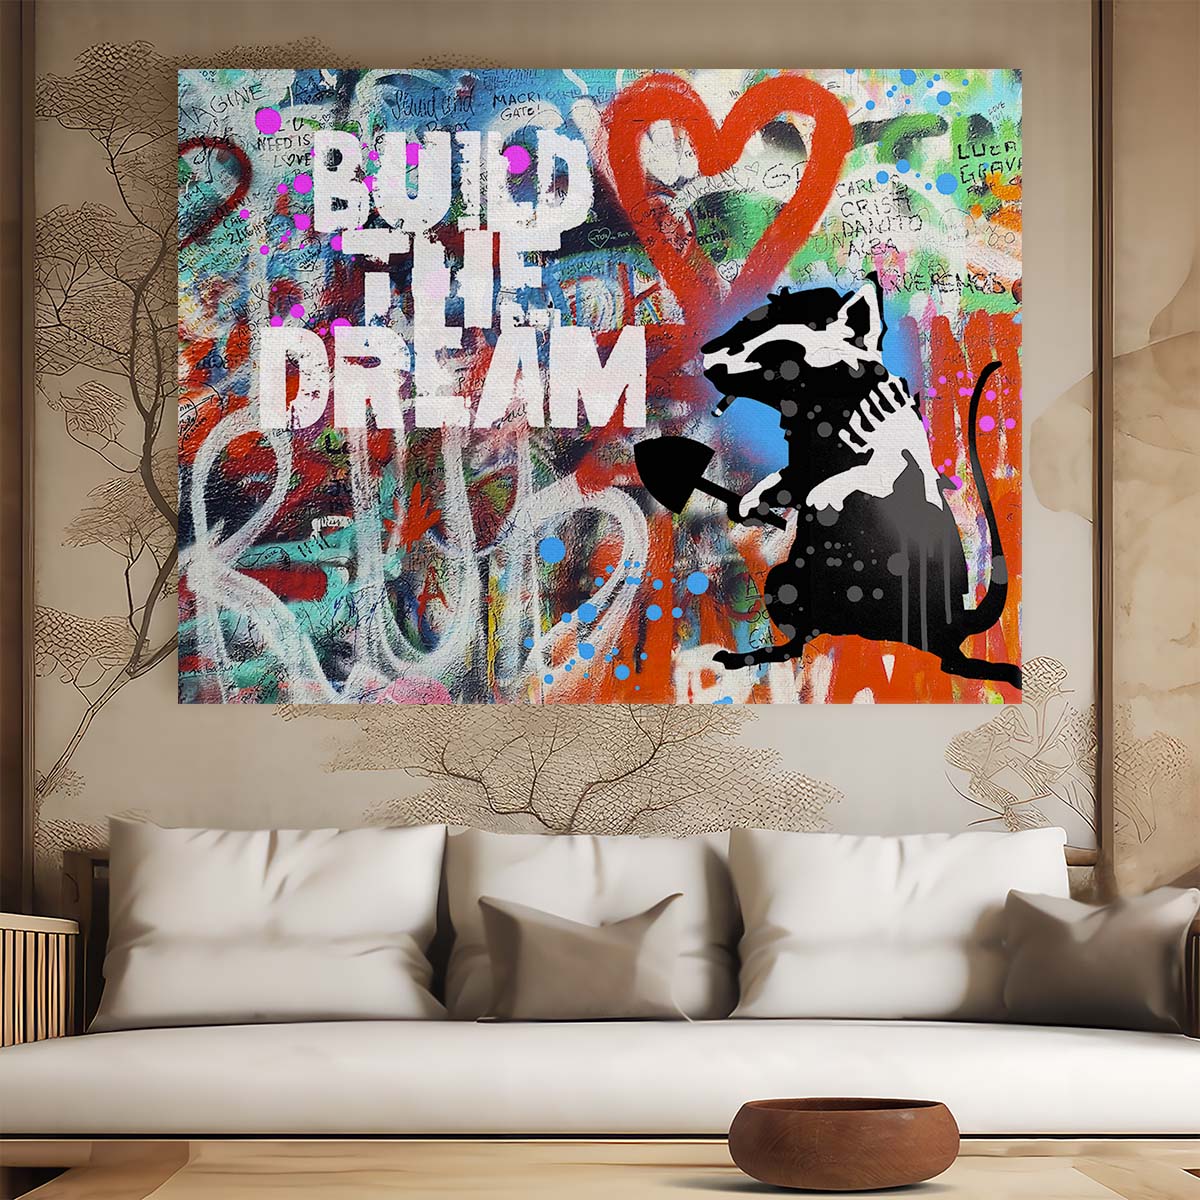 Build The Dream Graffiti Wall Art by Luxuriance Designs. Made in USA.